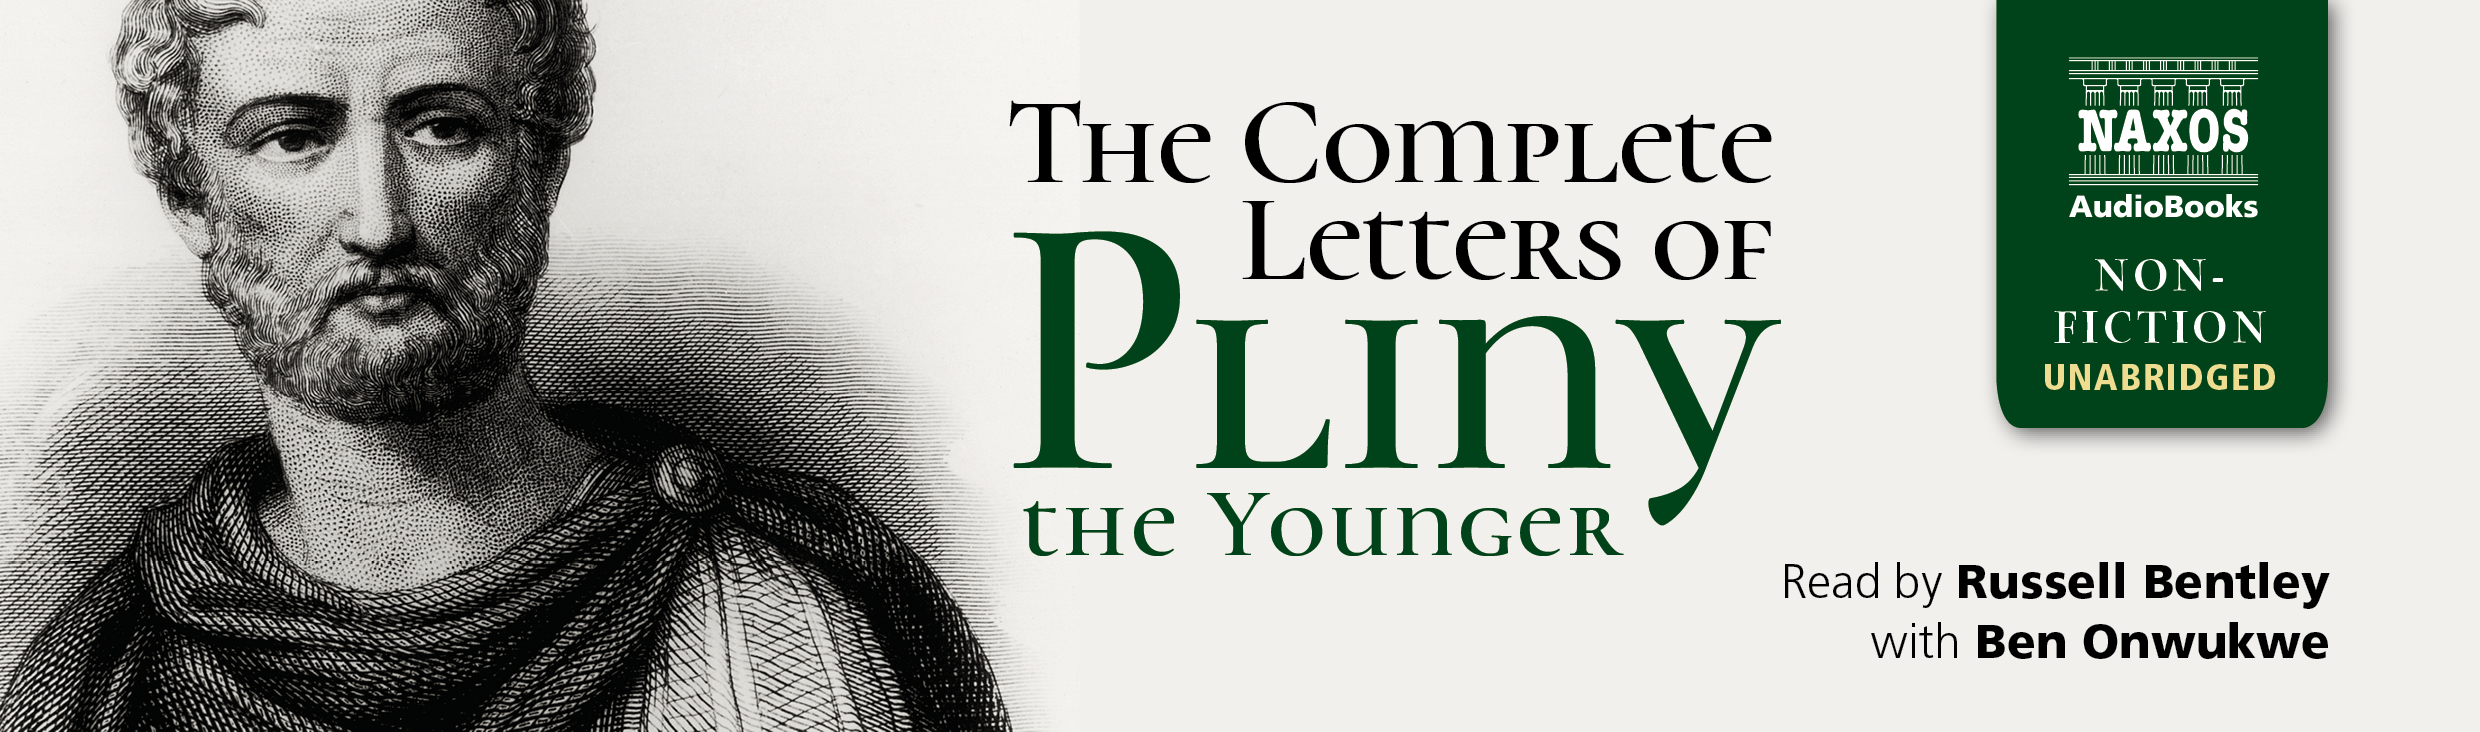 The Complete Letters of Pliny the Younger (unabridged)